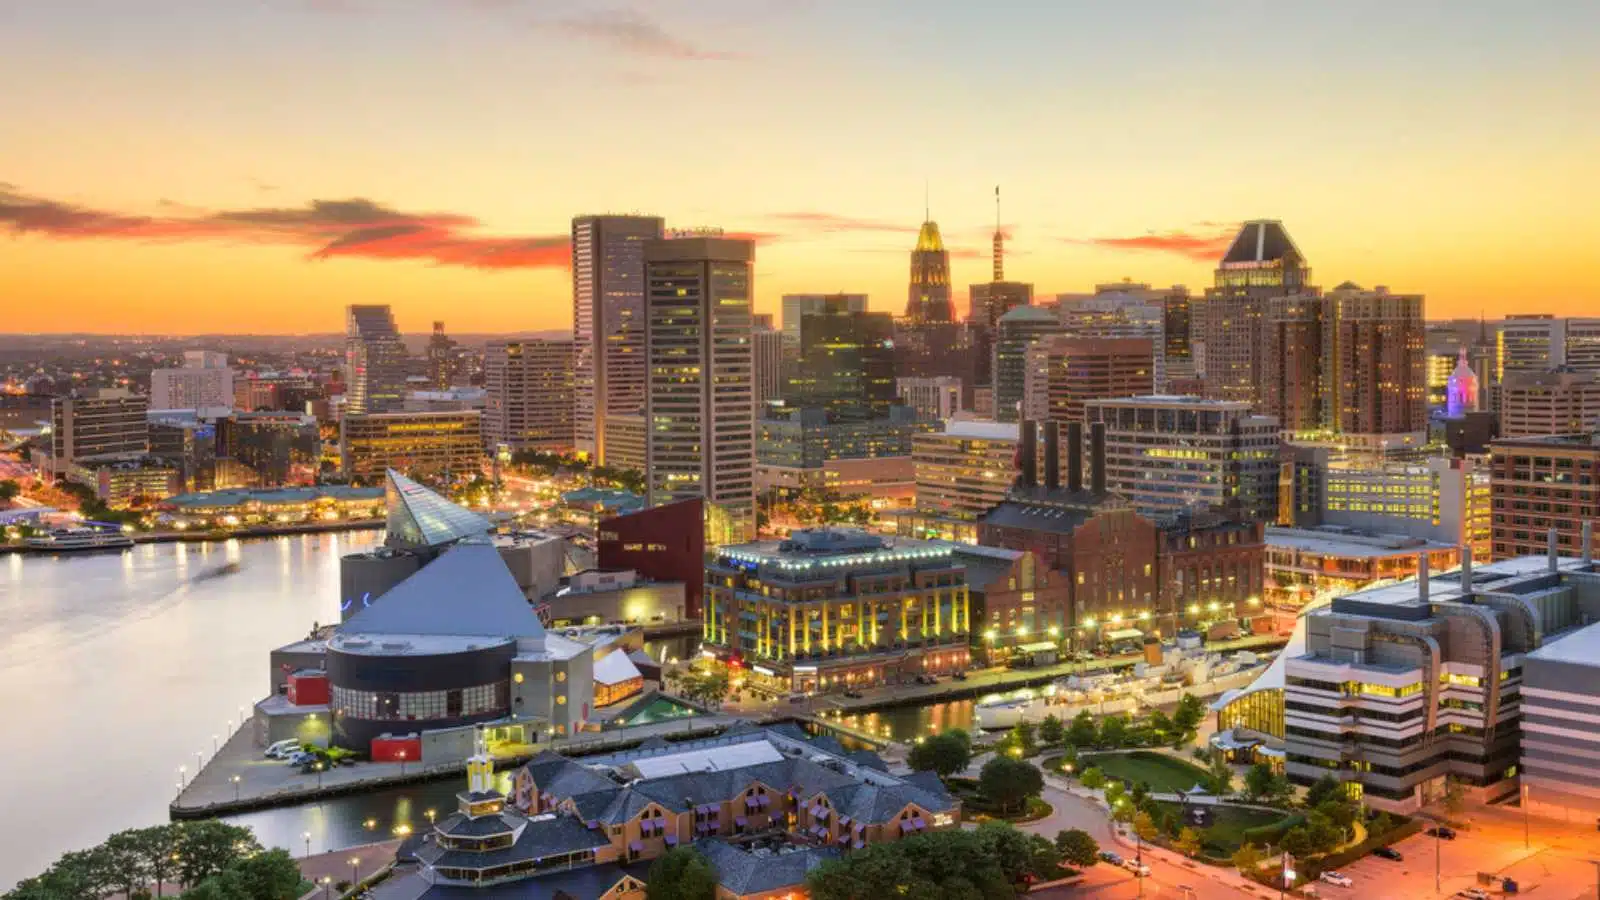 Baltimore, Maryland, USA downtown cityscape at dusk.